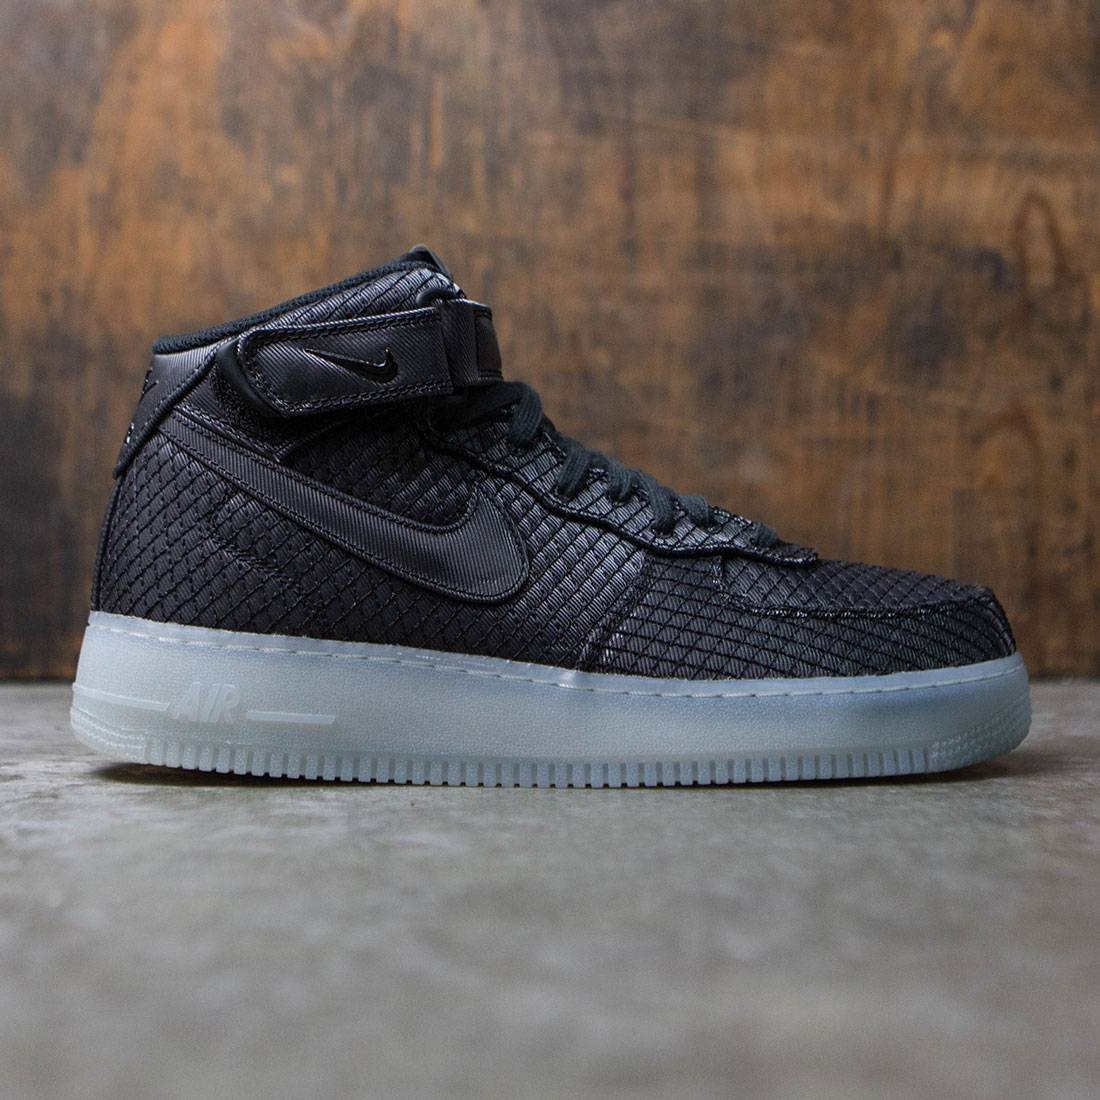 nike air force 1 mid 07 lv8 black and white